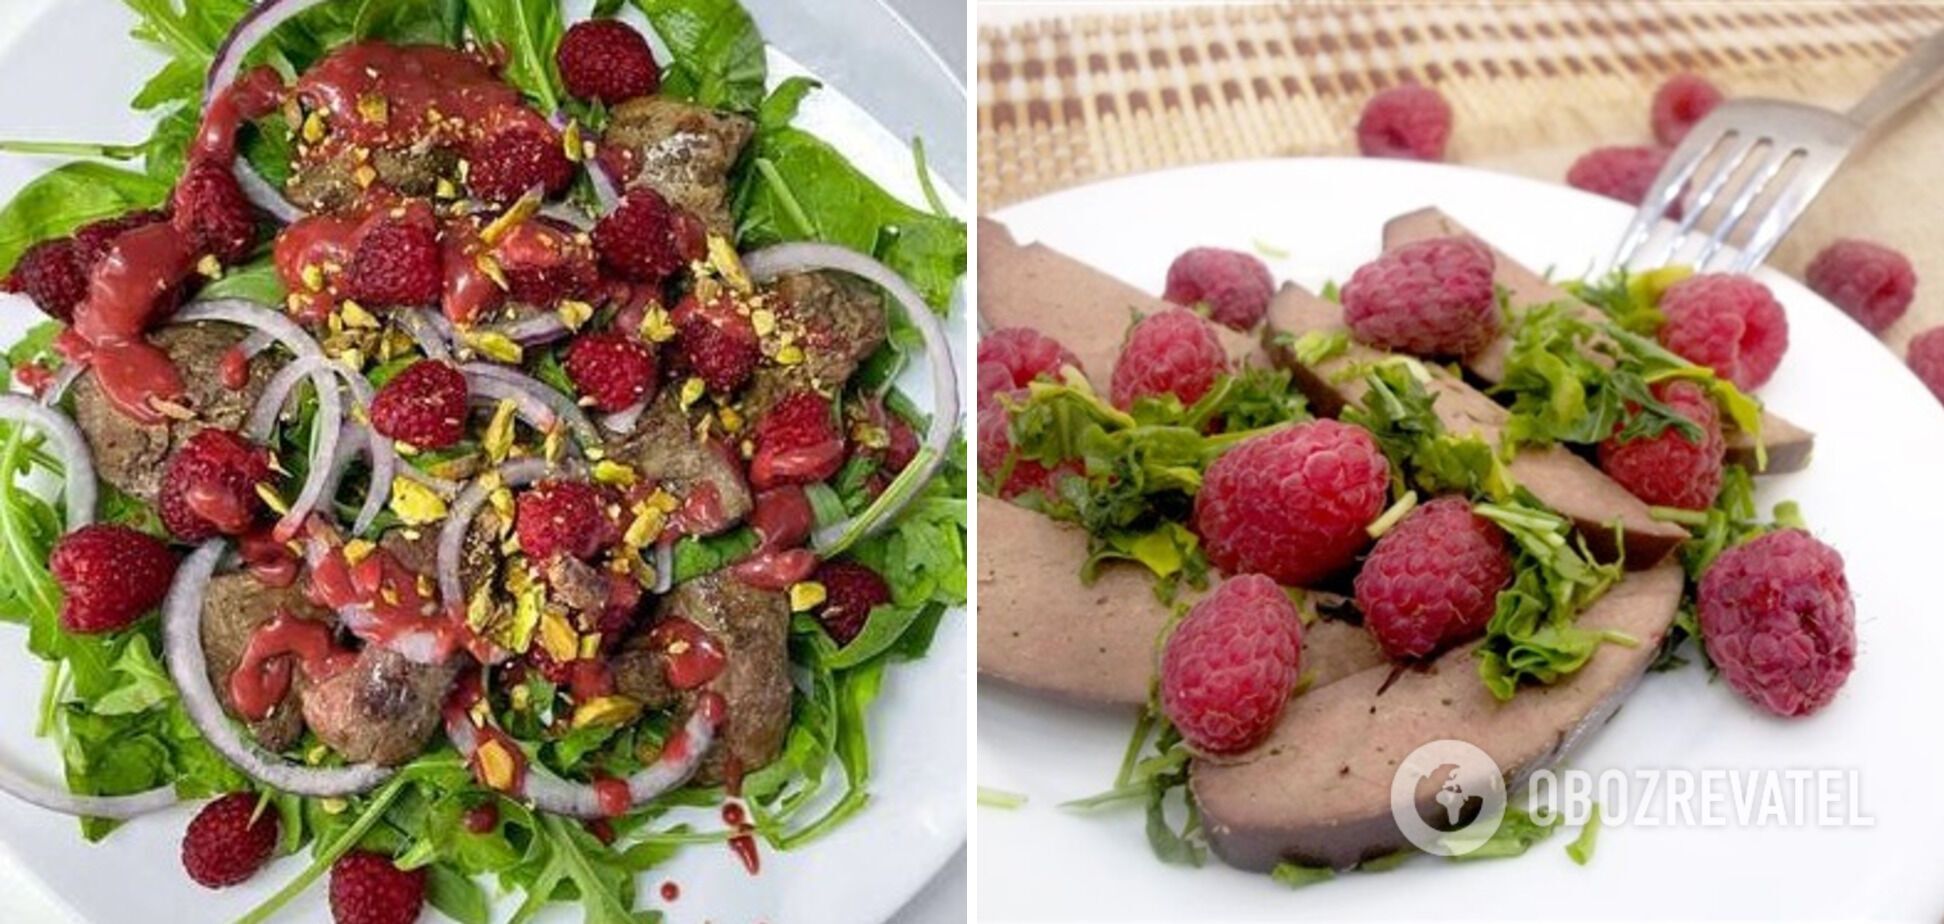 Salad with liver